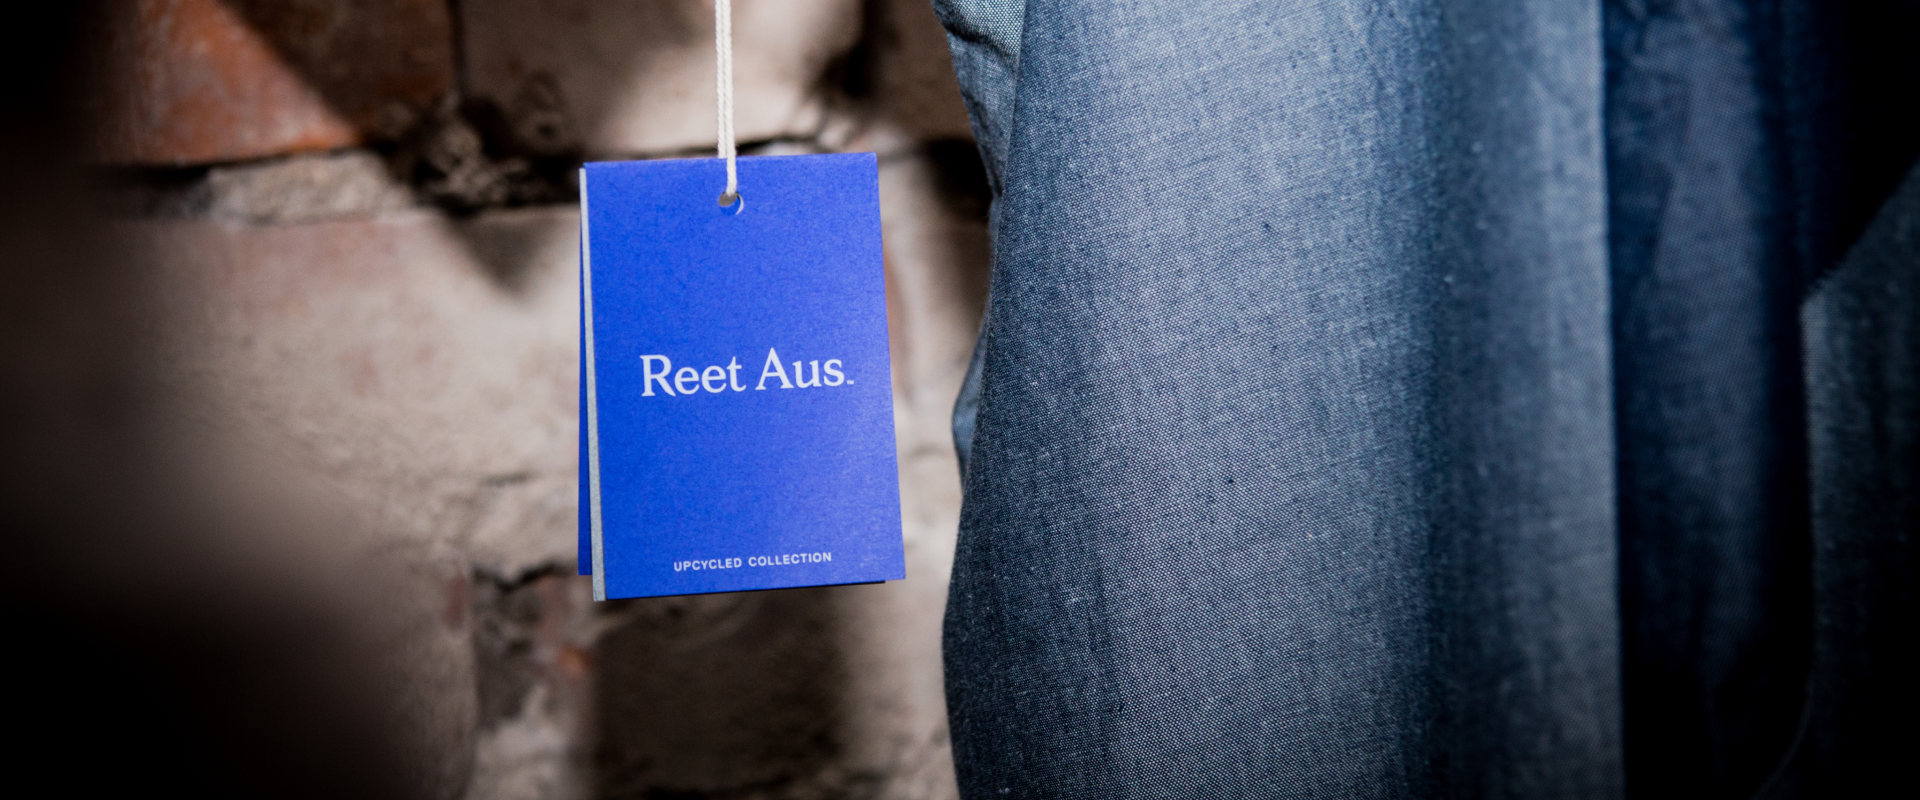 Reet Aus Upcycled collection hangtag